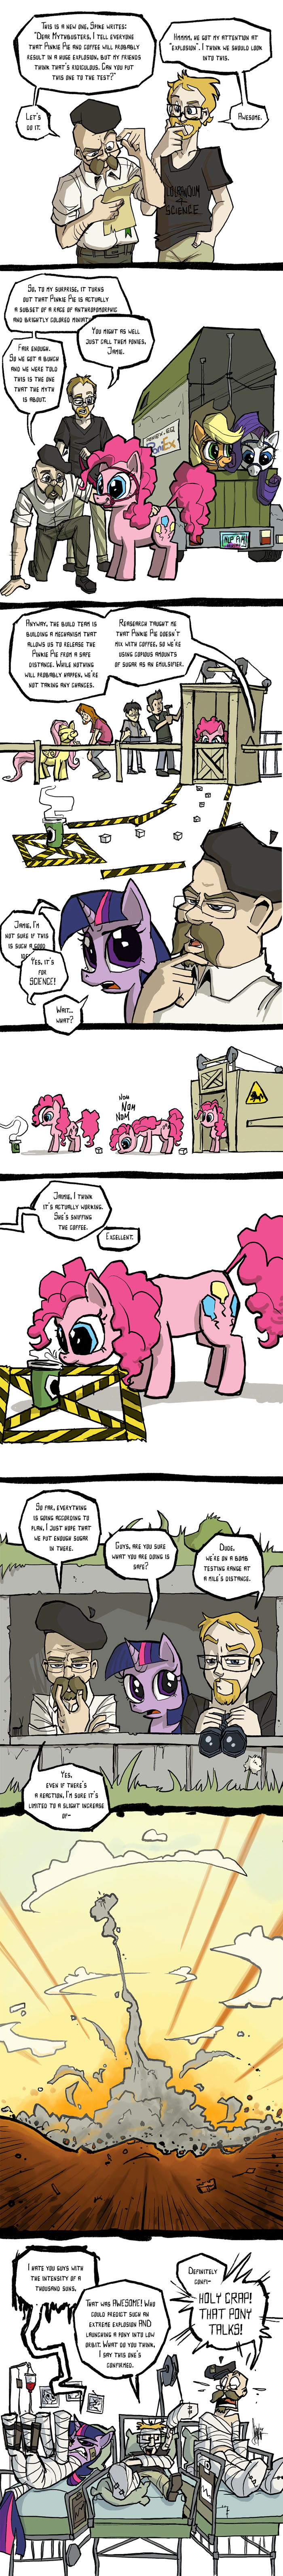 [Obrázek: today_on_mythbusters__ponies_by_theartrix-d3bmtq1.jpg]